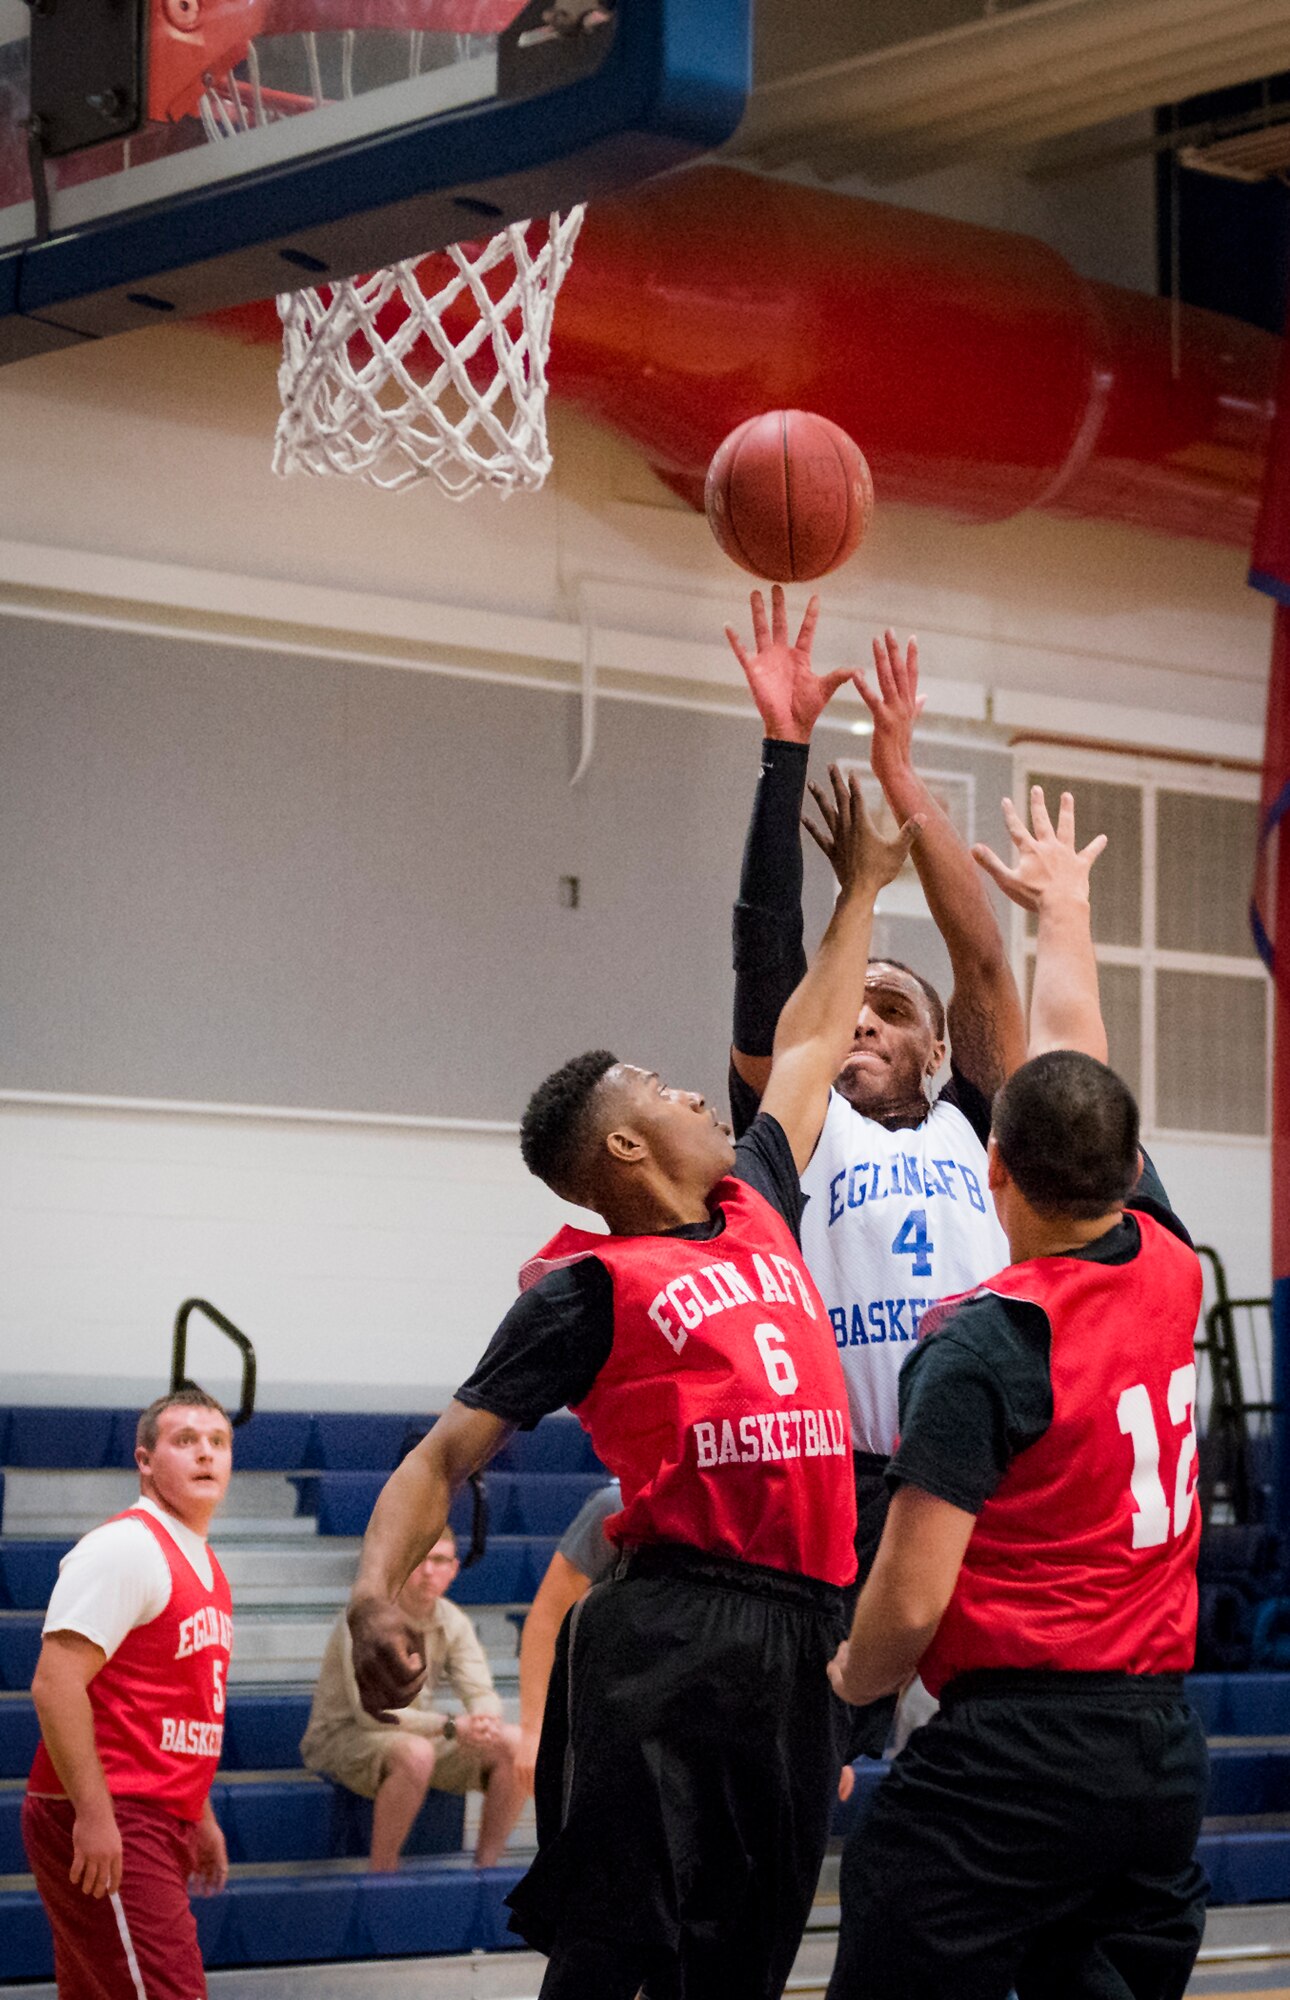 A Maintenance Squadron player shoots over two Medical Group Black defenders during their intramural basketball game at Eglin Air Force Base, Fla., Jan. 12.  The MDG team won easily 30 to 25 in their first game of the new intramural season.  (U.S. Air Force photo/Samuel King Jr.)